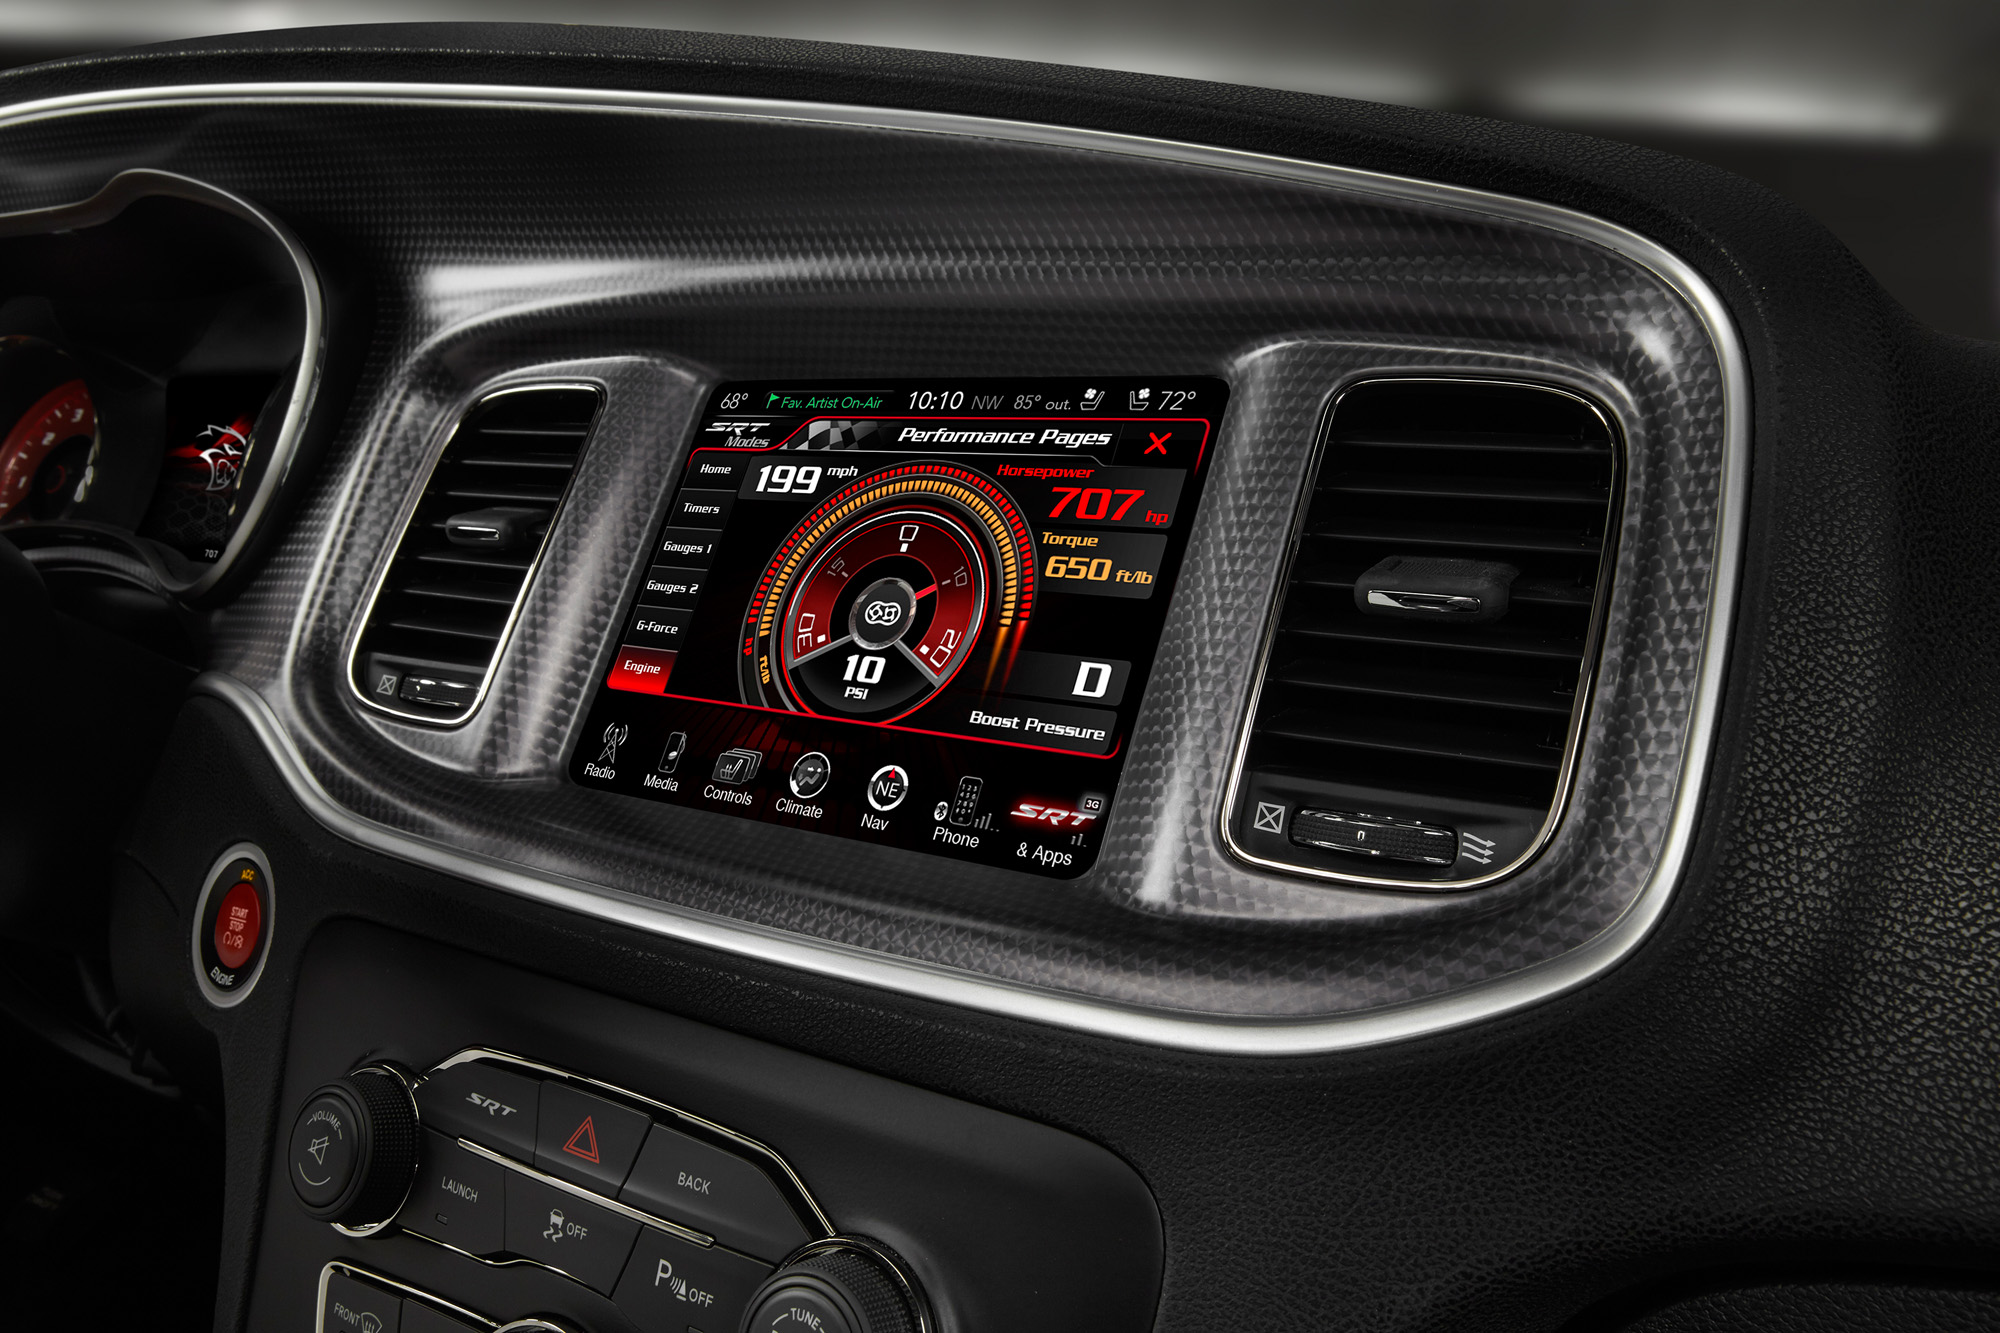 2015 Dodge Charger SRT - Engine at MAX screen